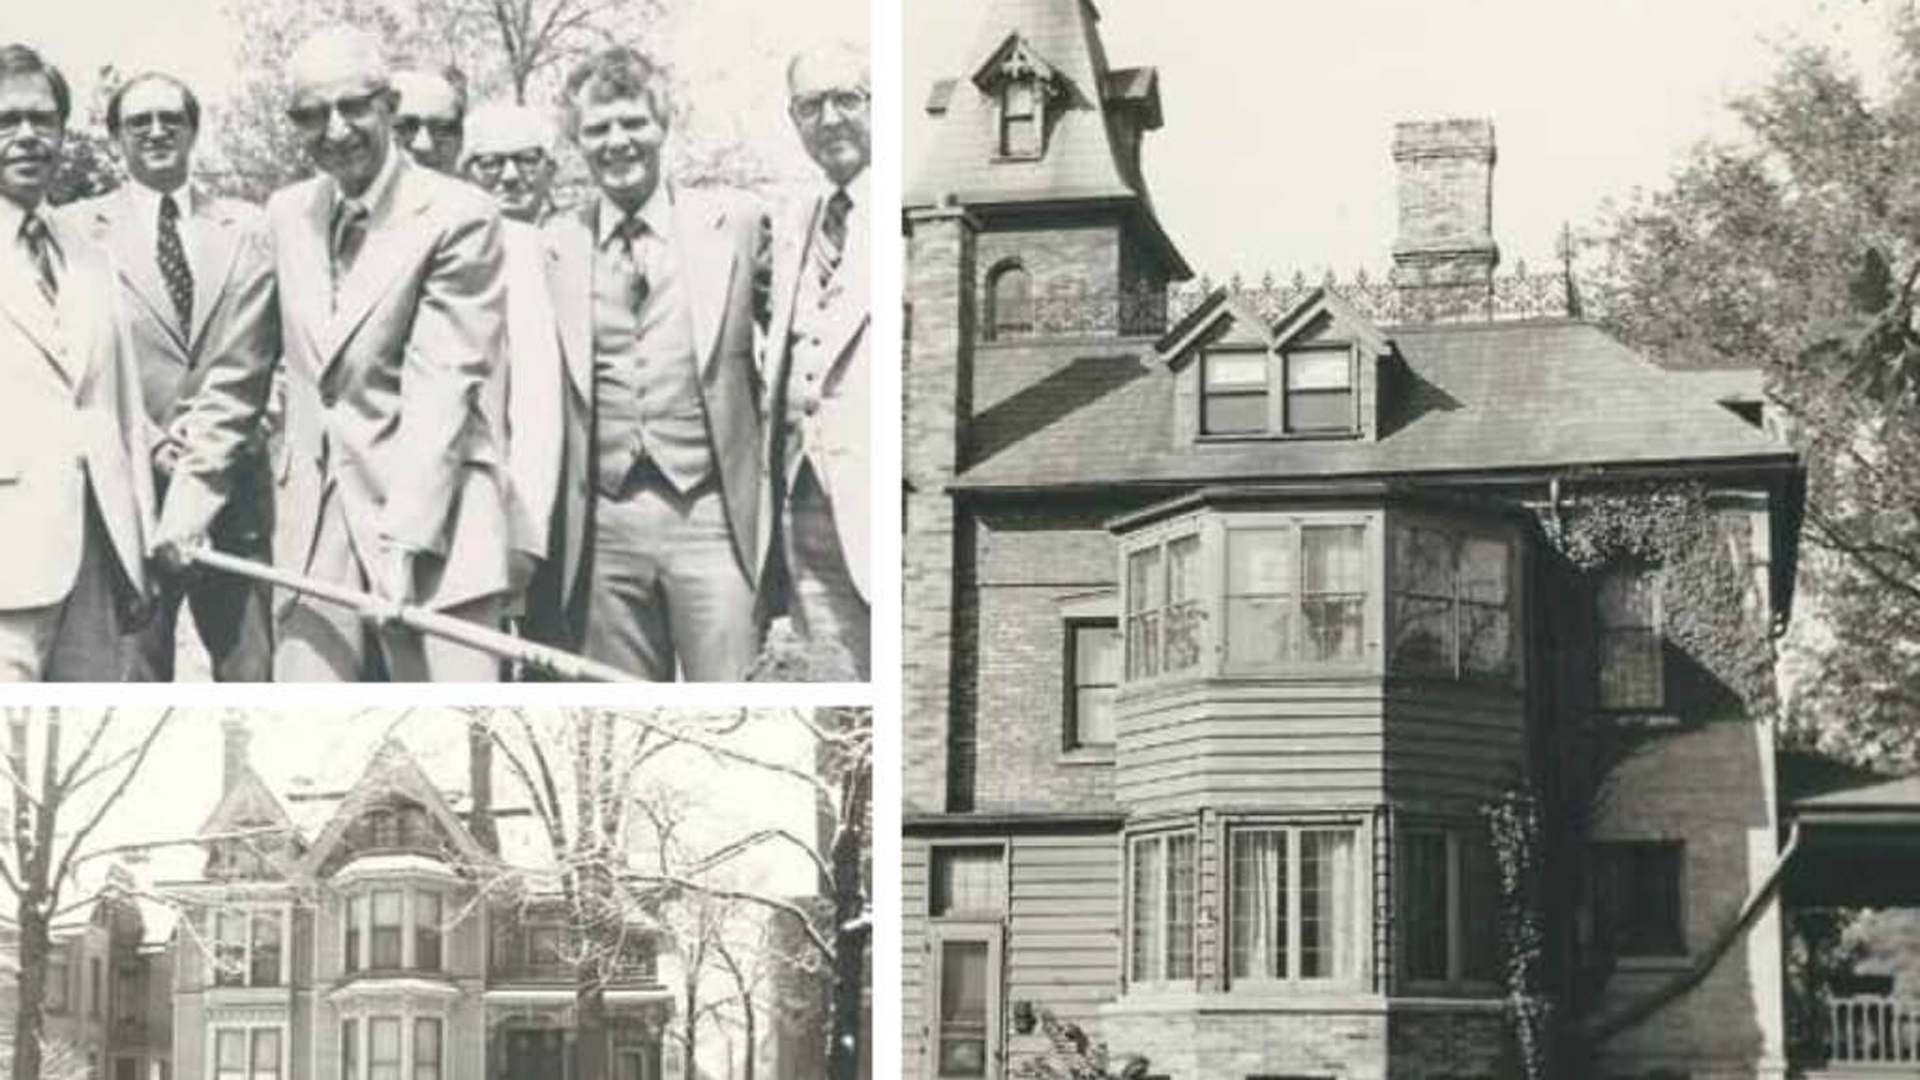 Three images of the buildings and staff of Milwaukee Bible Institute